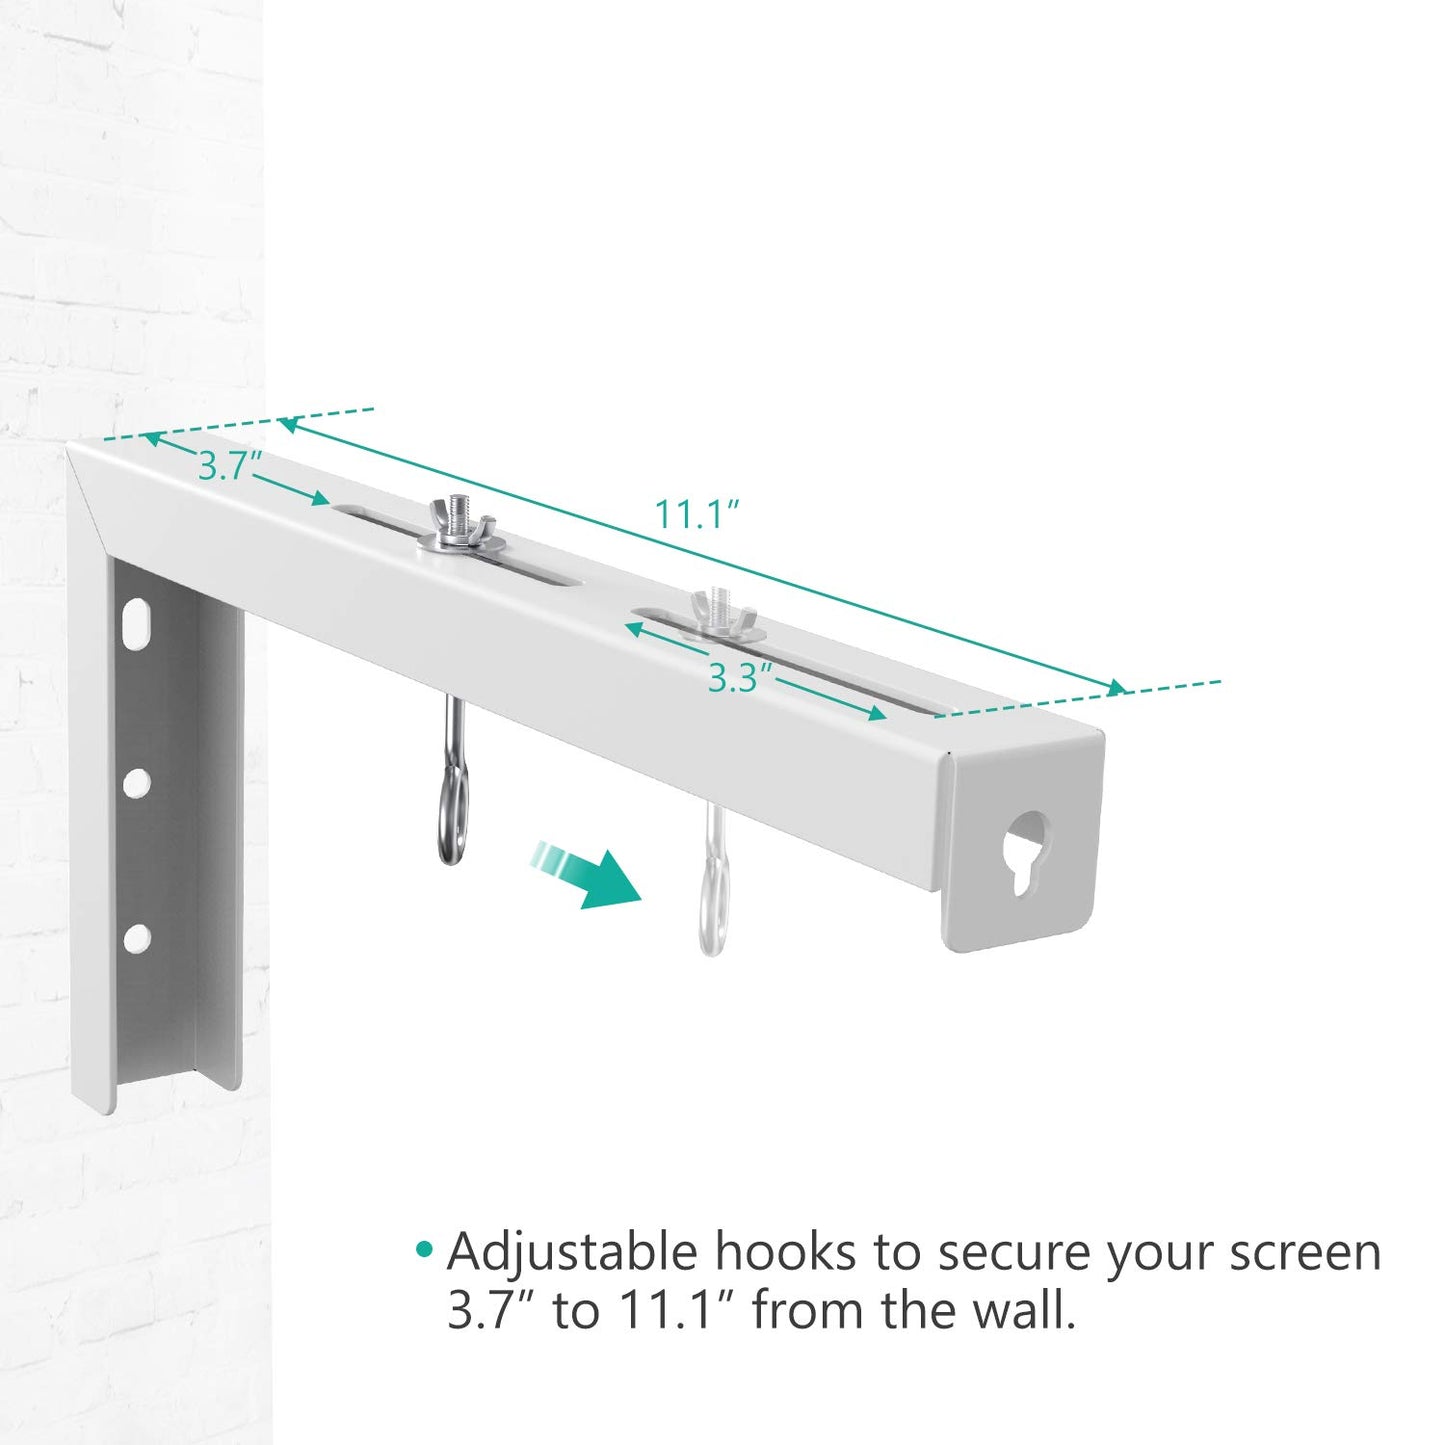 WALI Universal Projector Screen Ceiling Mount, Wall Hanging Mount L-Brackets, 12 inch Adjustable Extension with Hook Kit, Perfect Projector Screen Placement Hold up to 80 lbs (PSM001XL-W), White